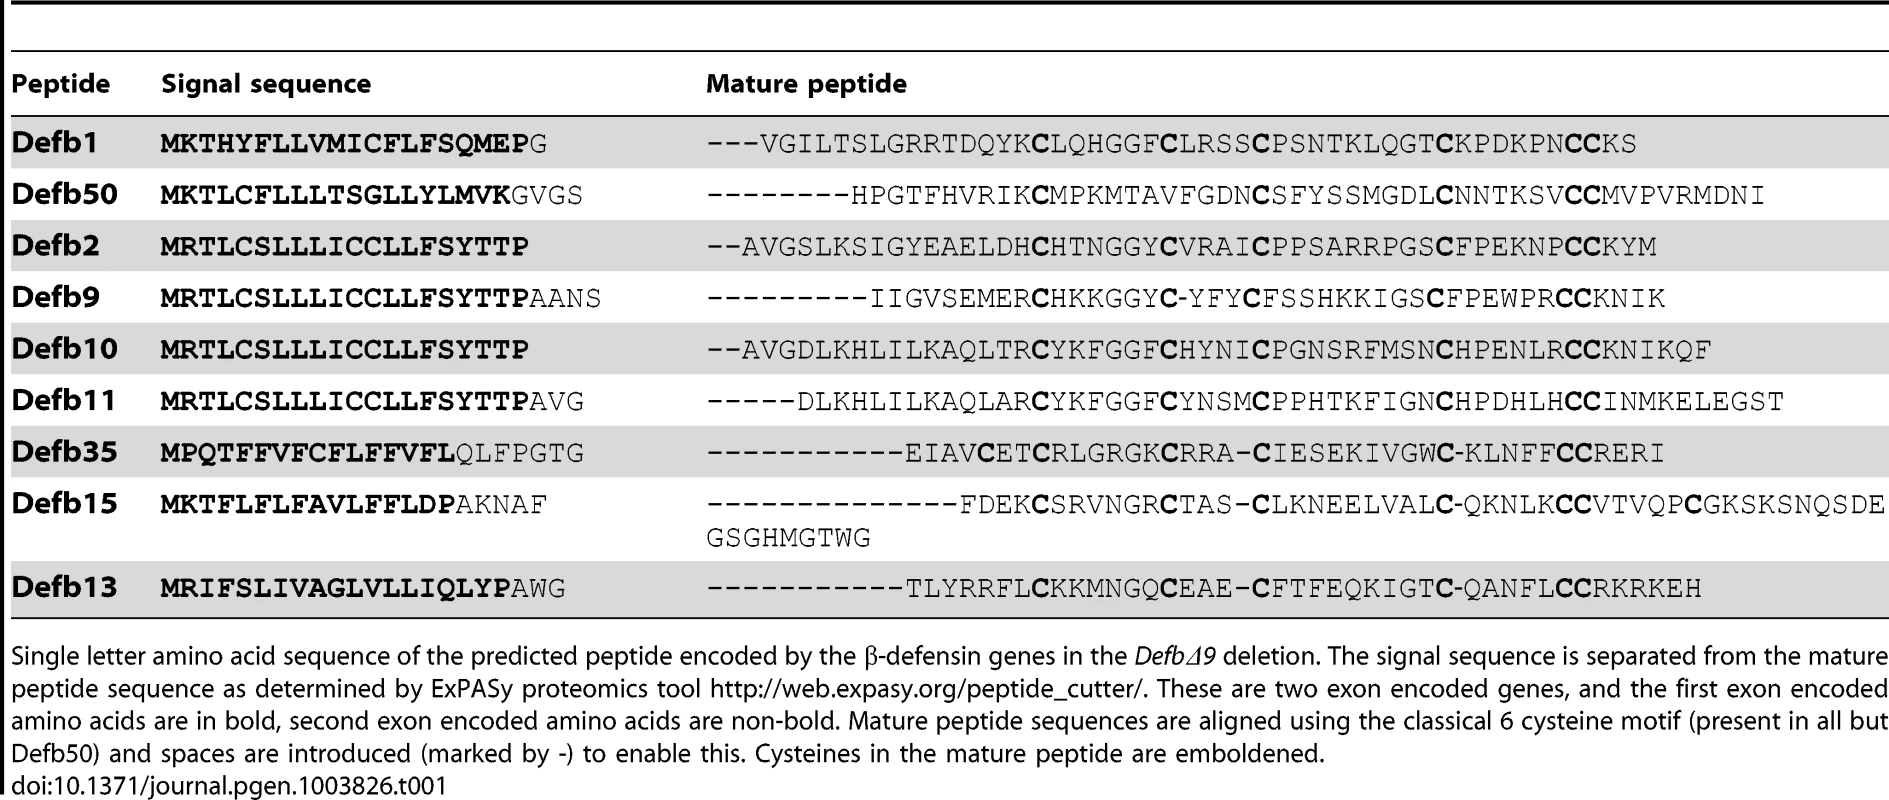 Peptide sequence of β-defensins deleted in DefbΔ9 deletion.